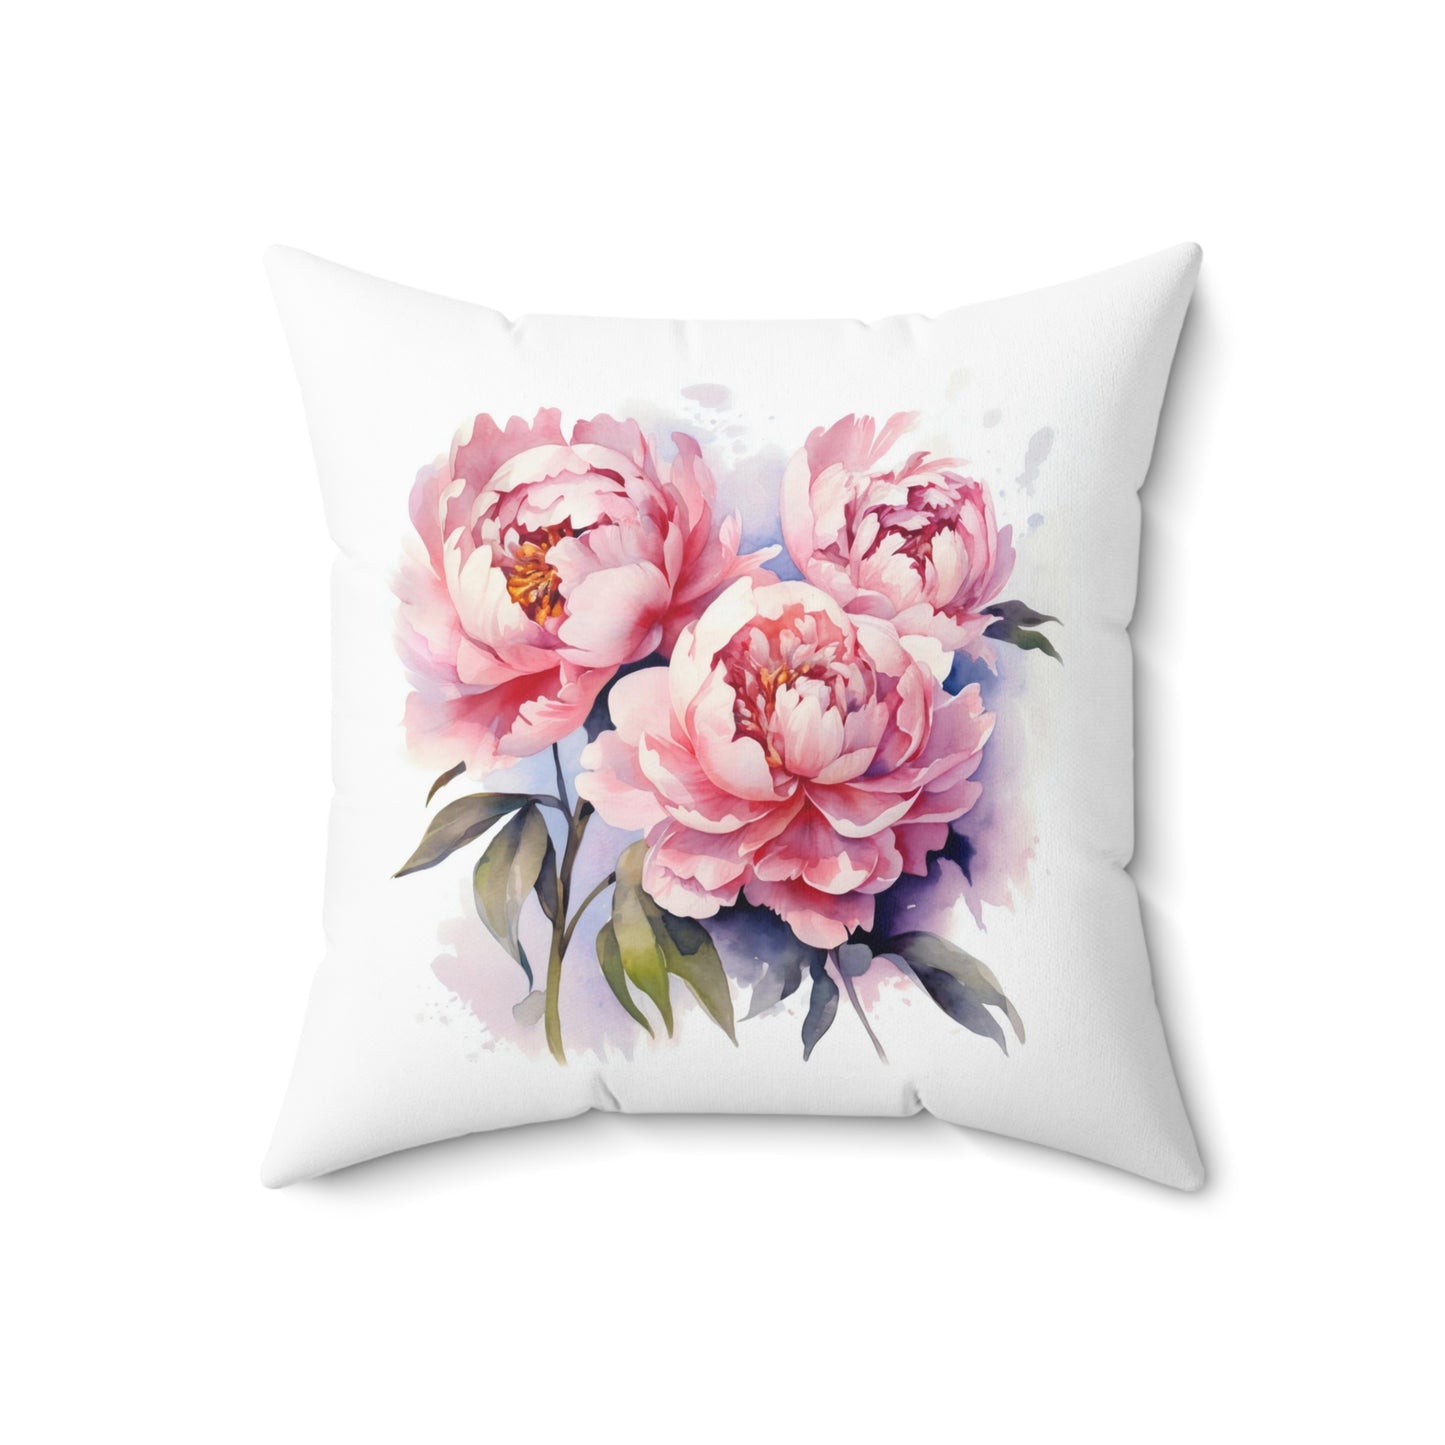 Peonies Pillow, Pink Flowers Throw Pillow, Watercolor Peonies Decorative Pillow, Square Floral Cushion, Pink Accent Pillow, Concealed Zipper